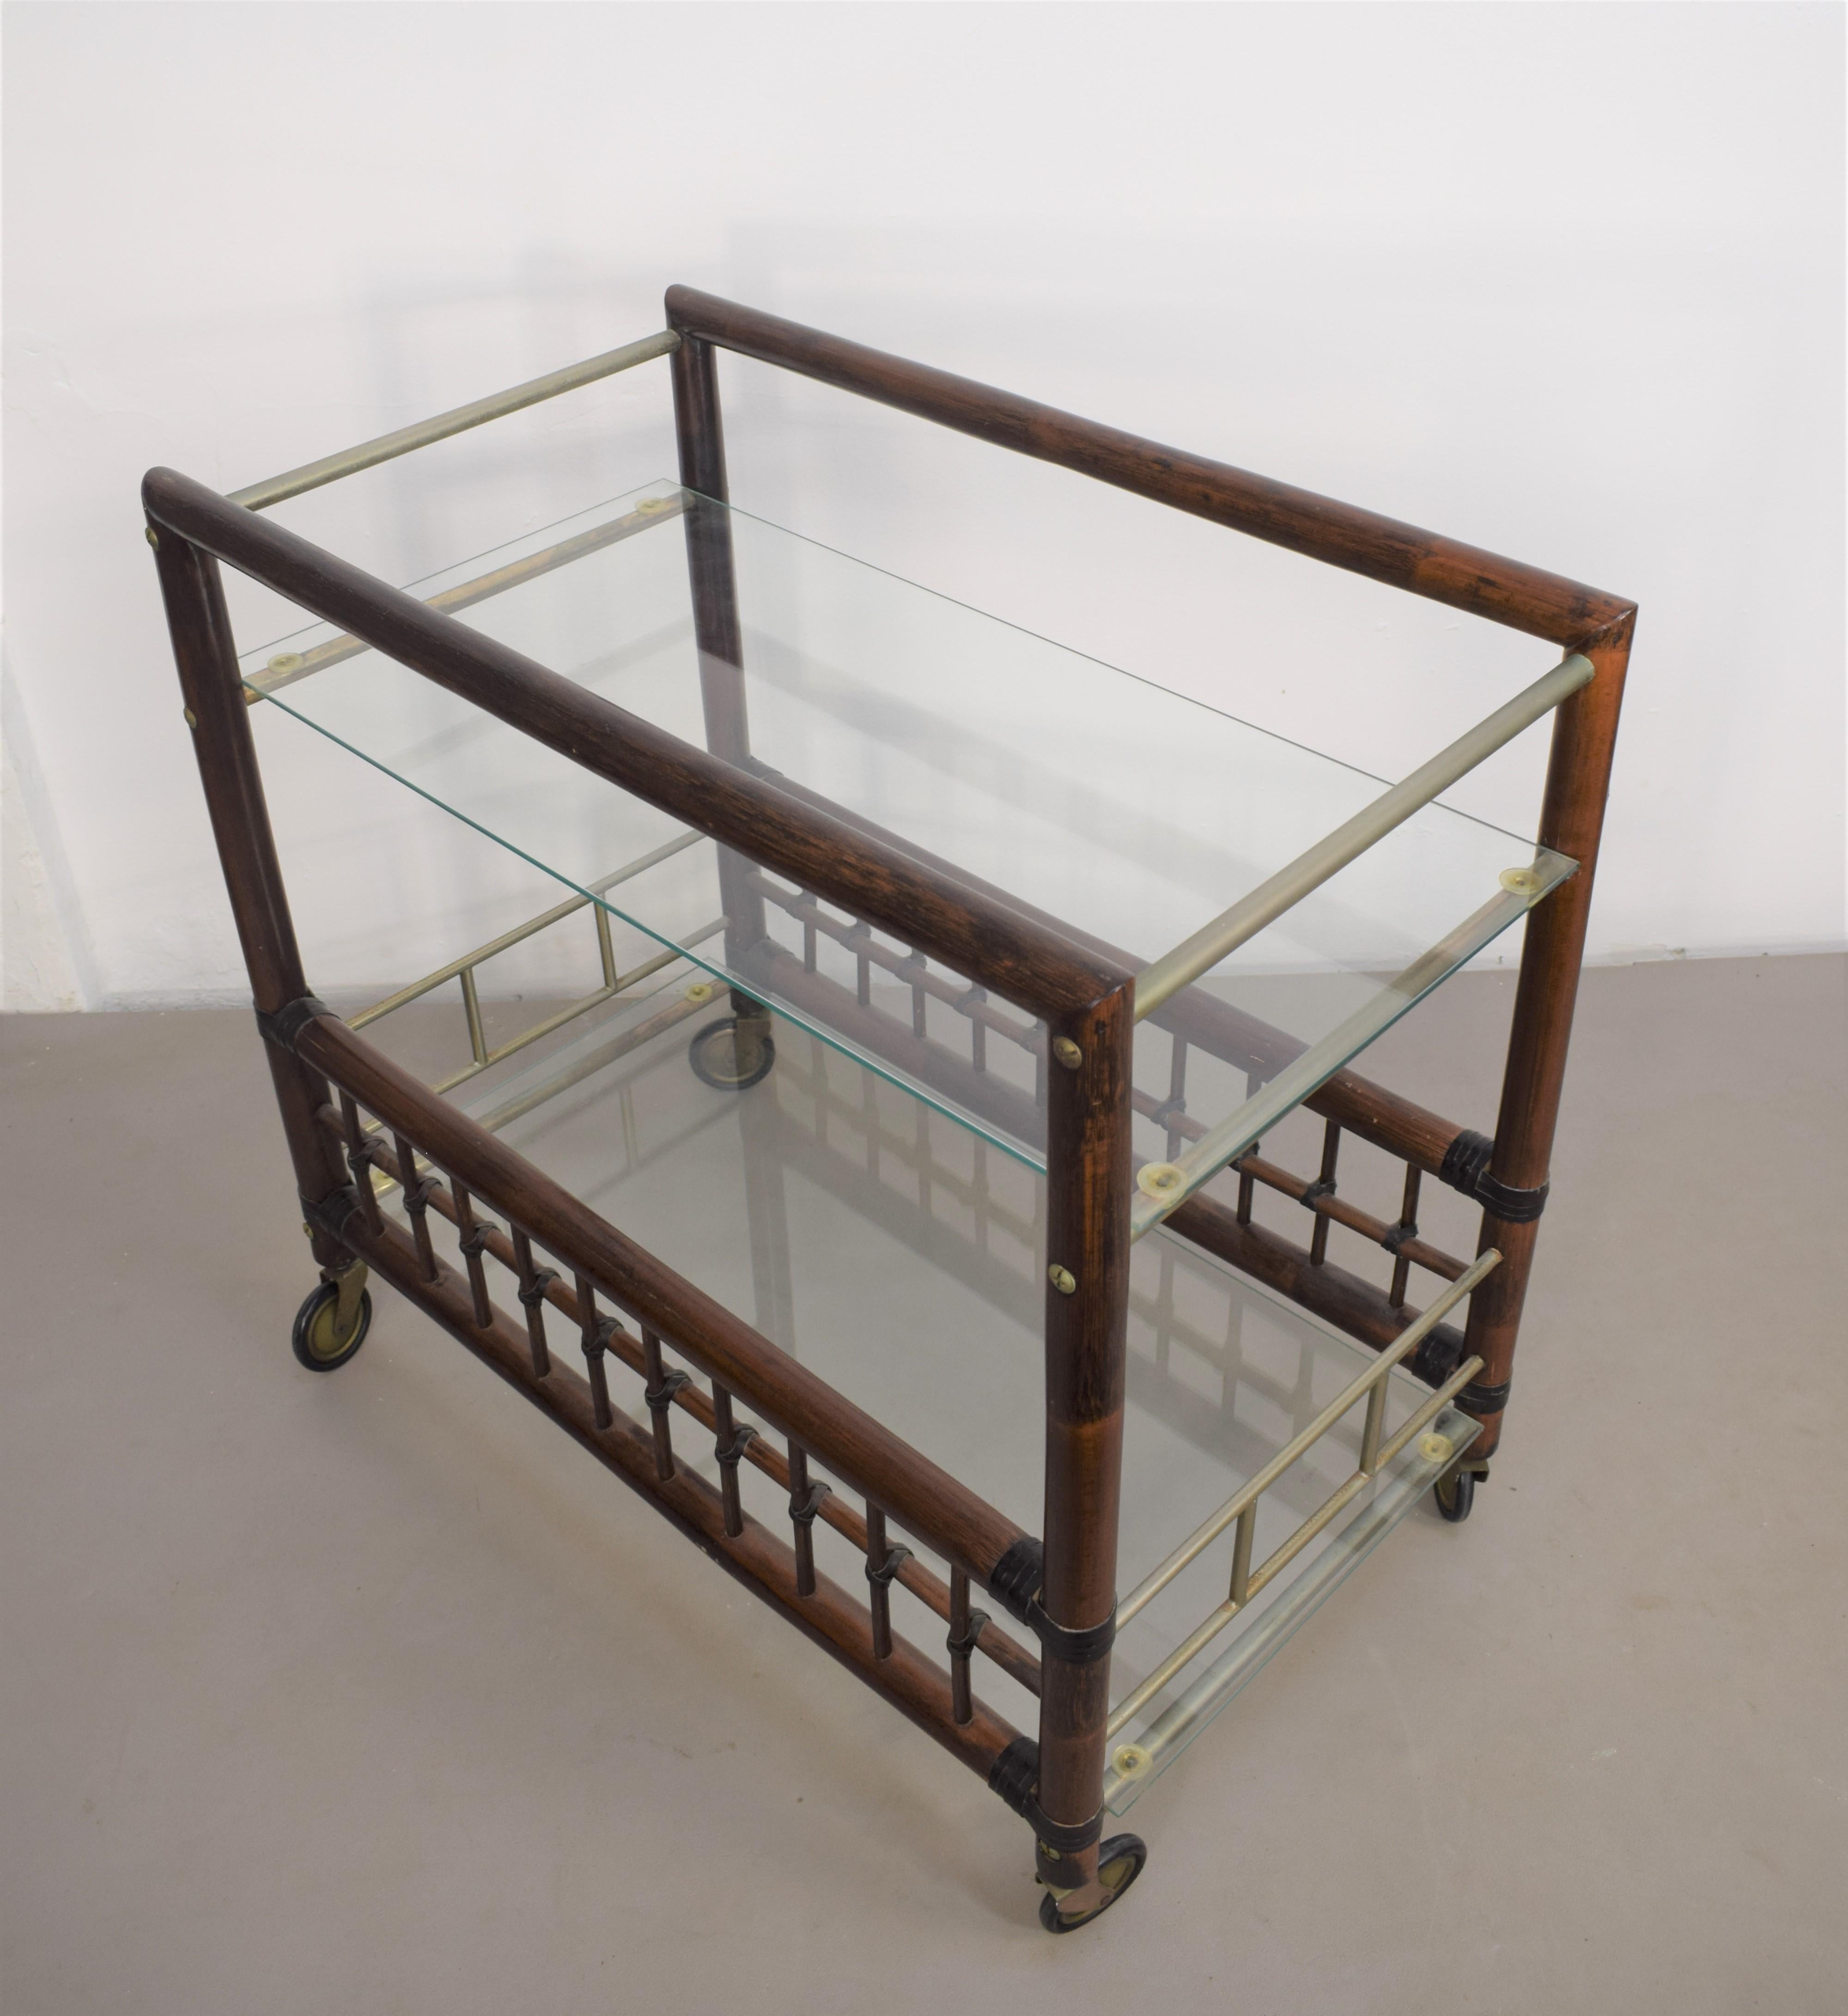 Italian Bar Cart in the style of Afra and Tobia Scarpa, 1960s For Sale 2